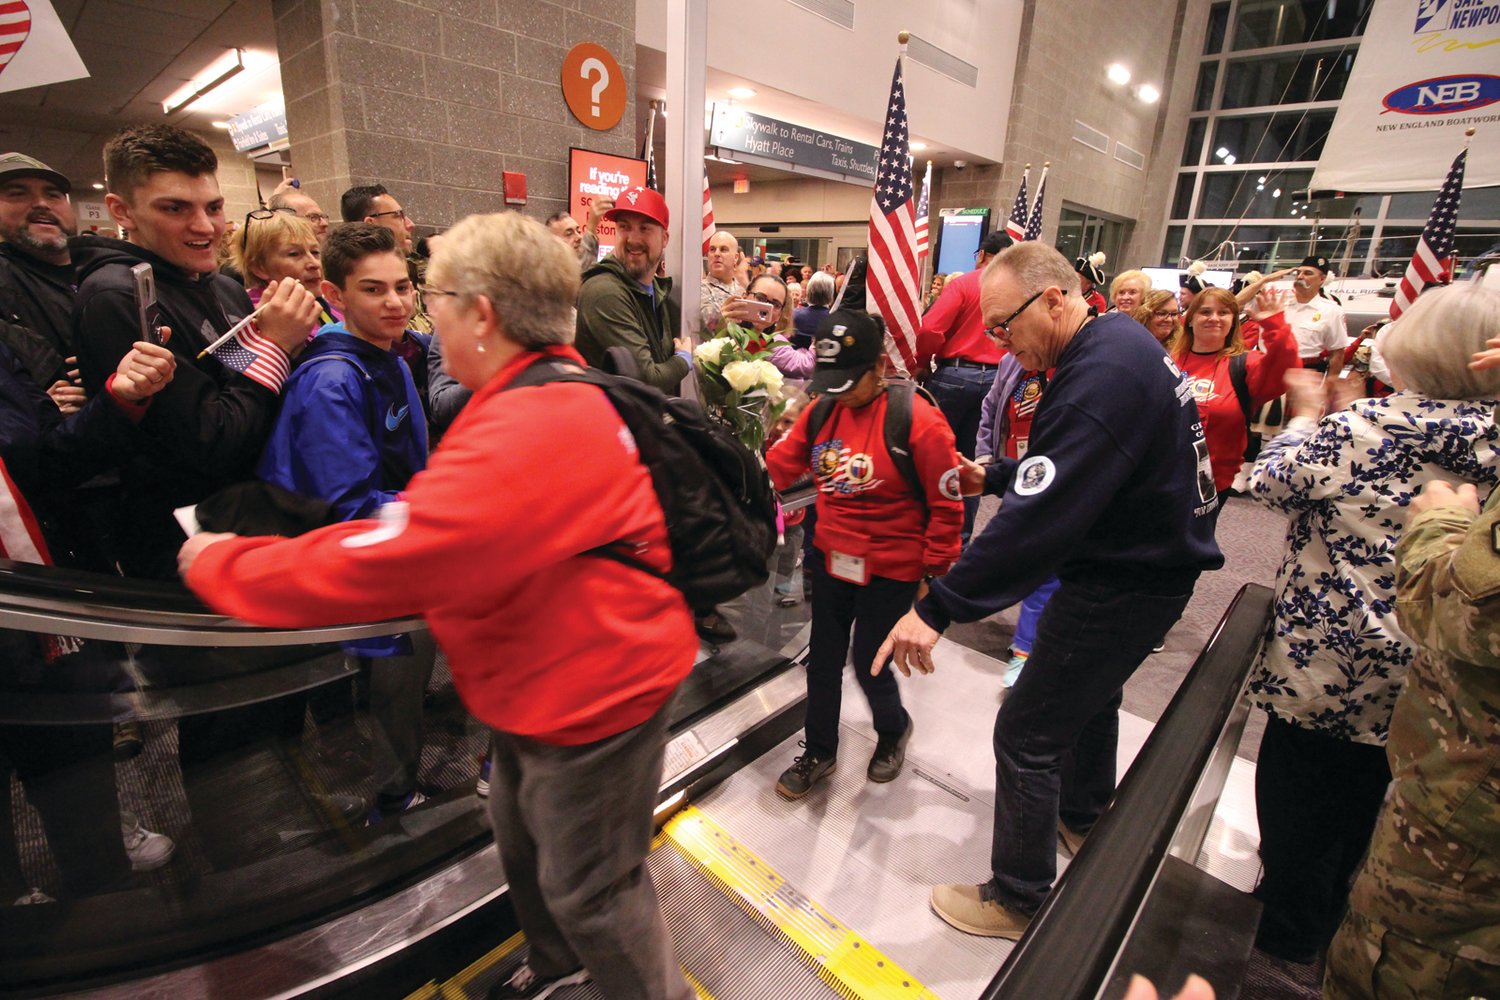 WATCH YOUR STEP: George Farrell assists one of the veterans in the all-women veterans flight hosted by the Federation of Women’s Clubs on April 6, 2019 as they enter the terminal and prepare to board the flight for a full day in Washington, DC. (Herald file photo)